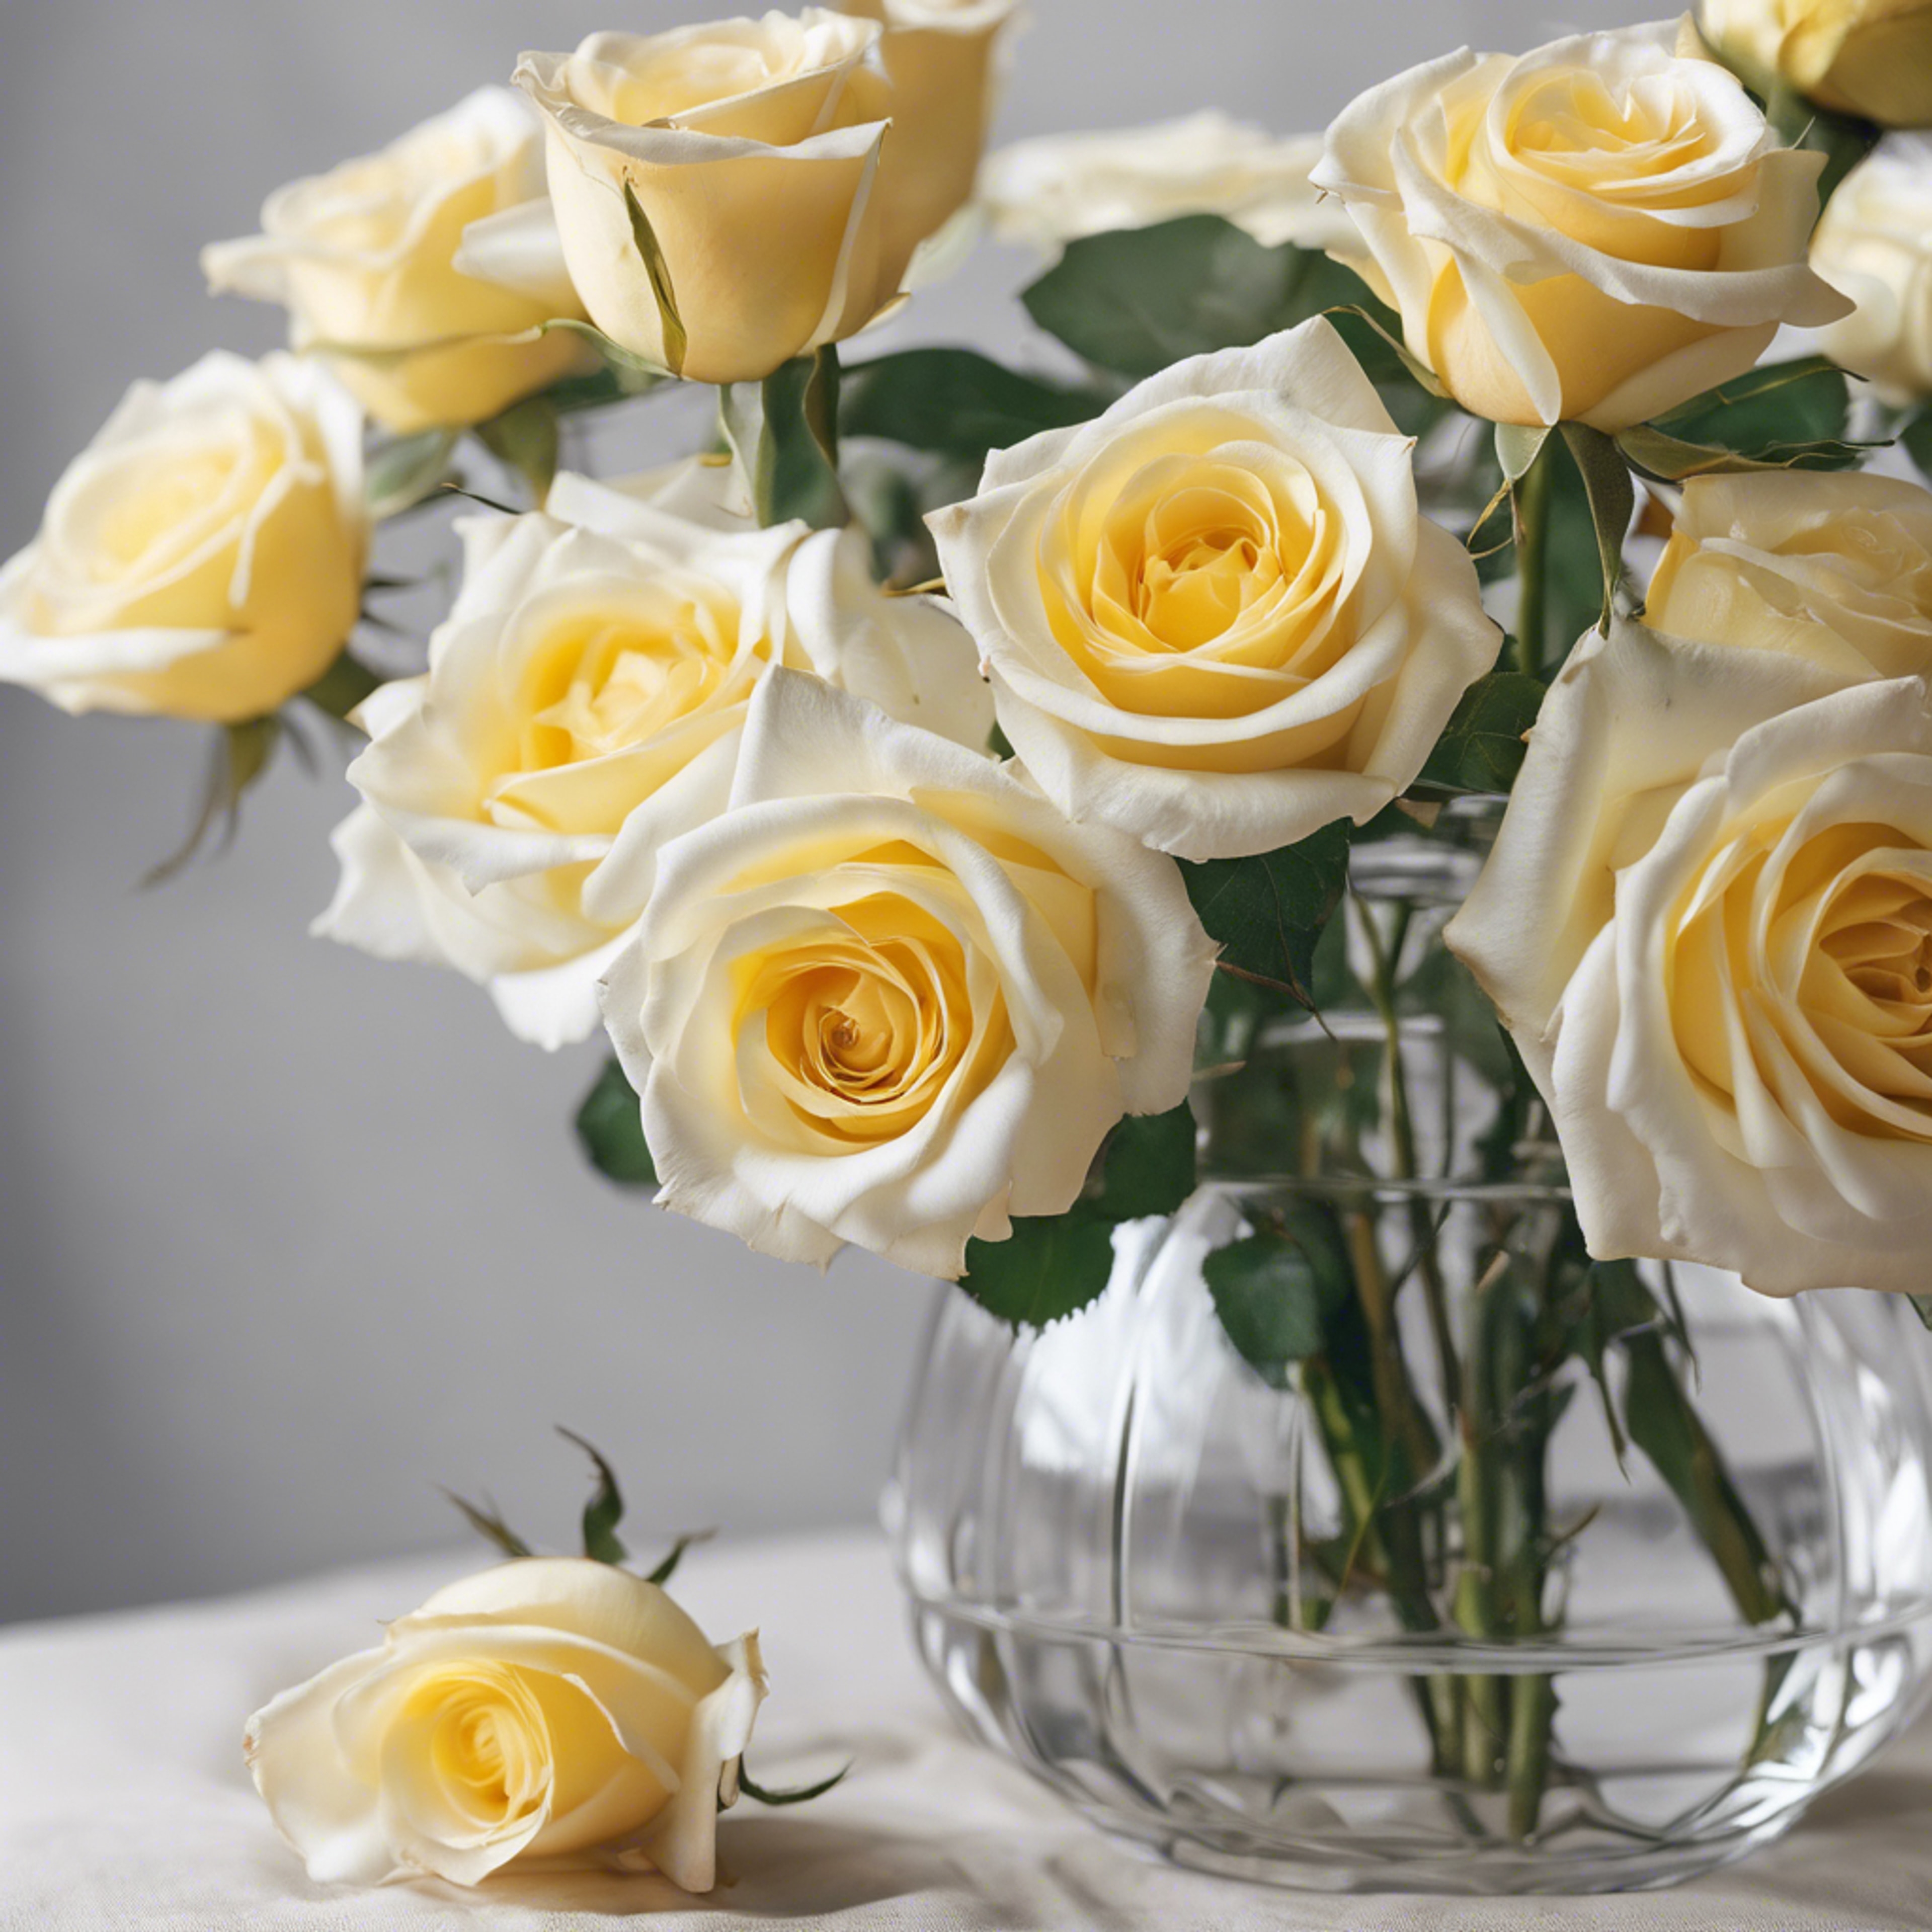 A beautiful array of luminescent white and yellow roses in a crystal clear vase.壁紙[29c0e485a0b1412795b9]